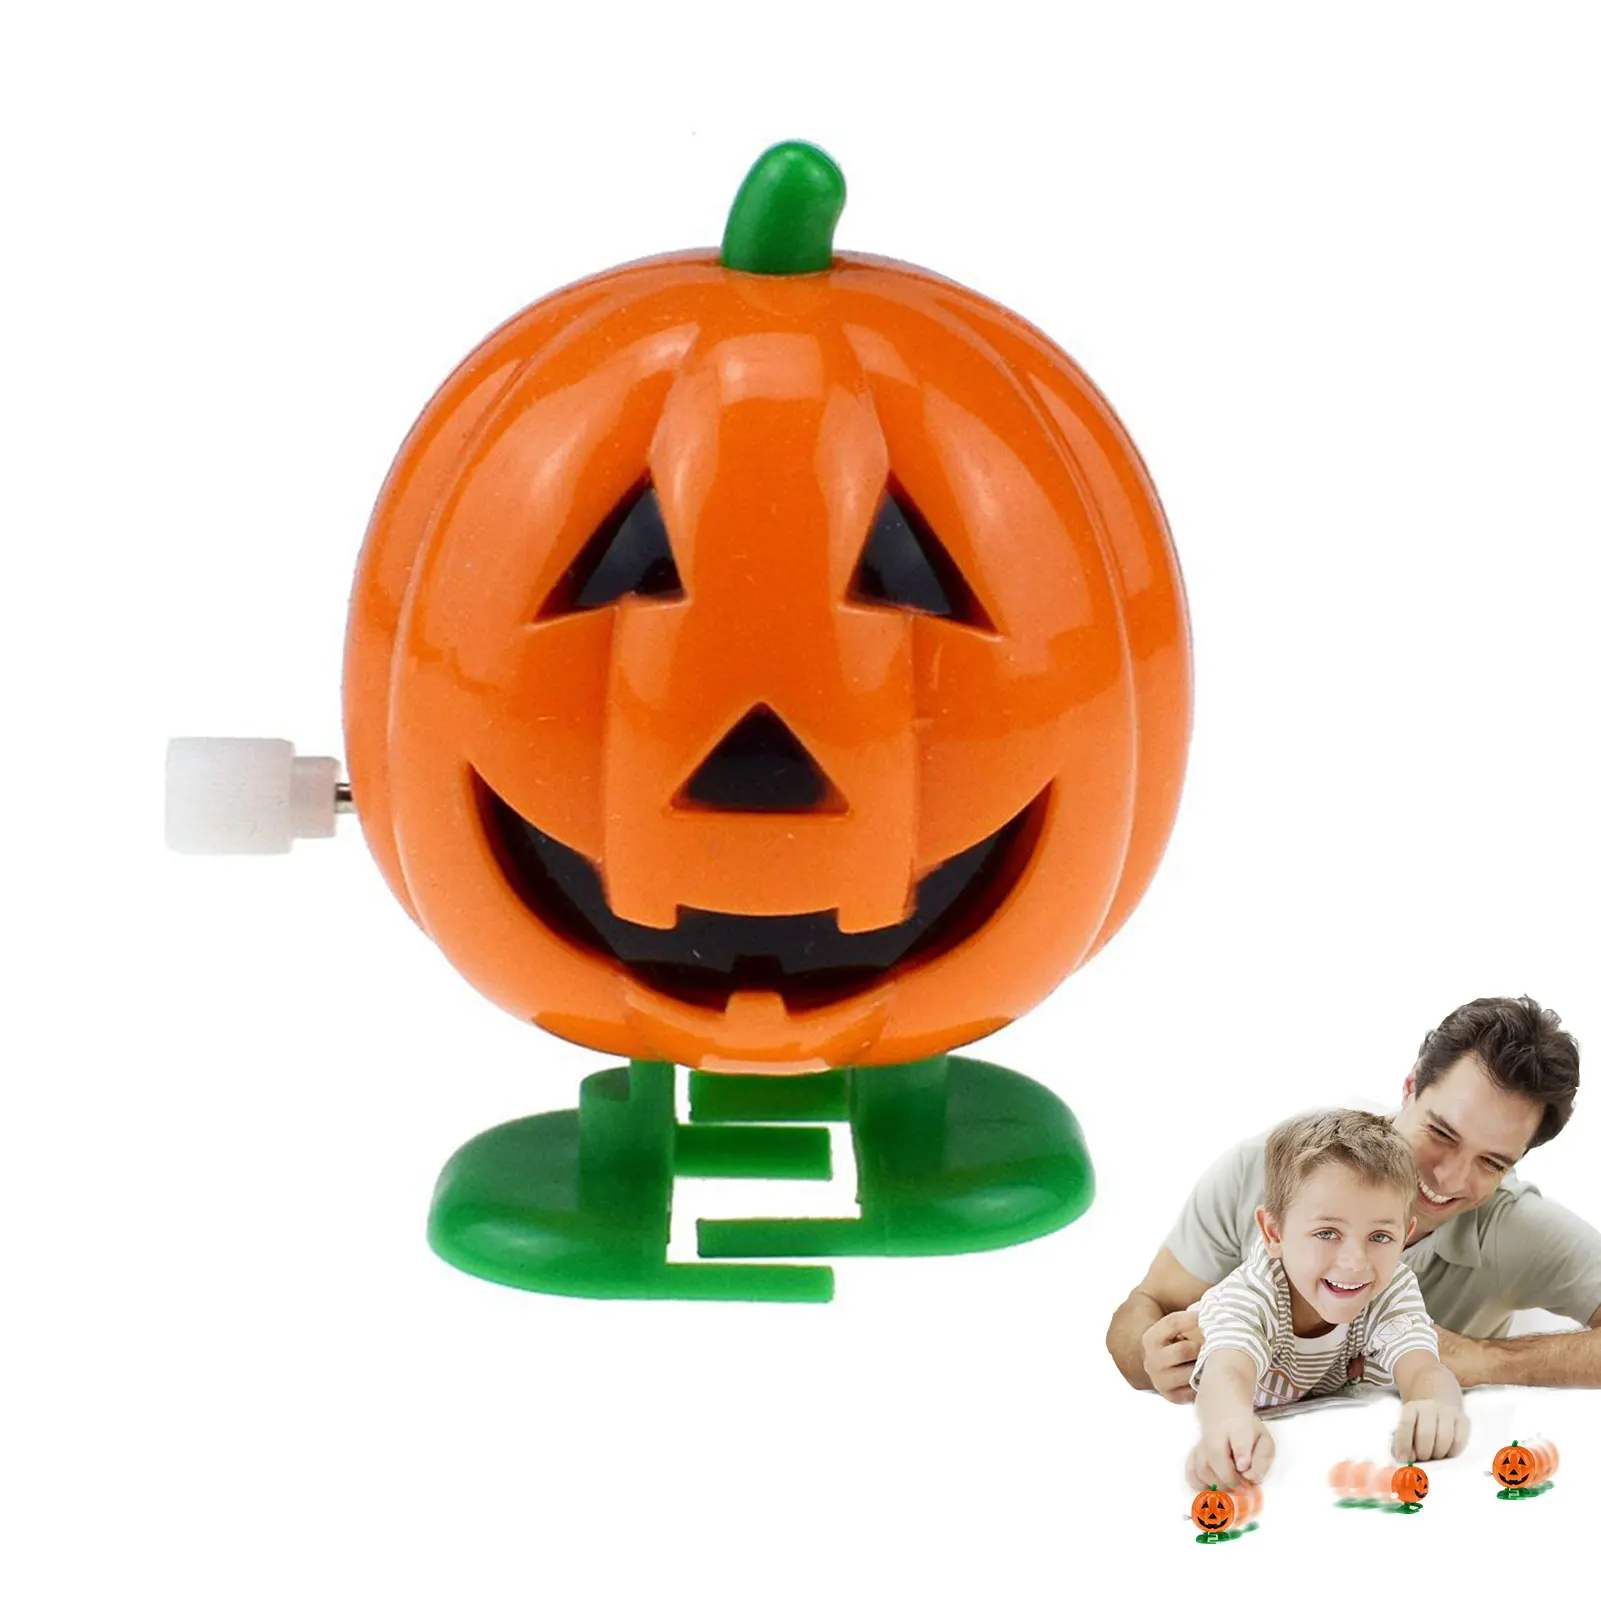 

6pcs Halloween Windup Toys 6pcs Cute Pumpkin Wind Up Toys Cute Jumping And Walking Clockwork Toys For Halloween Party Favors